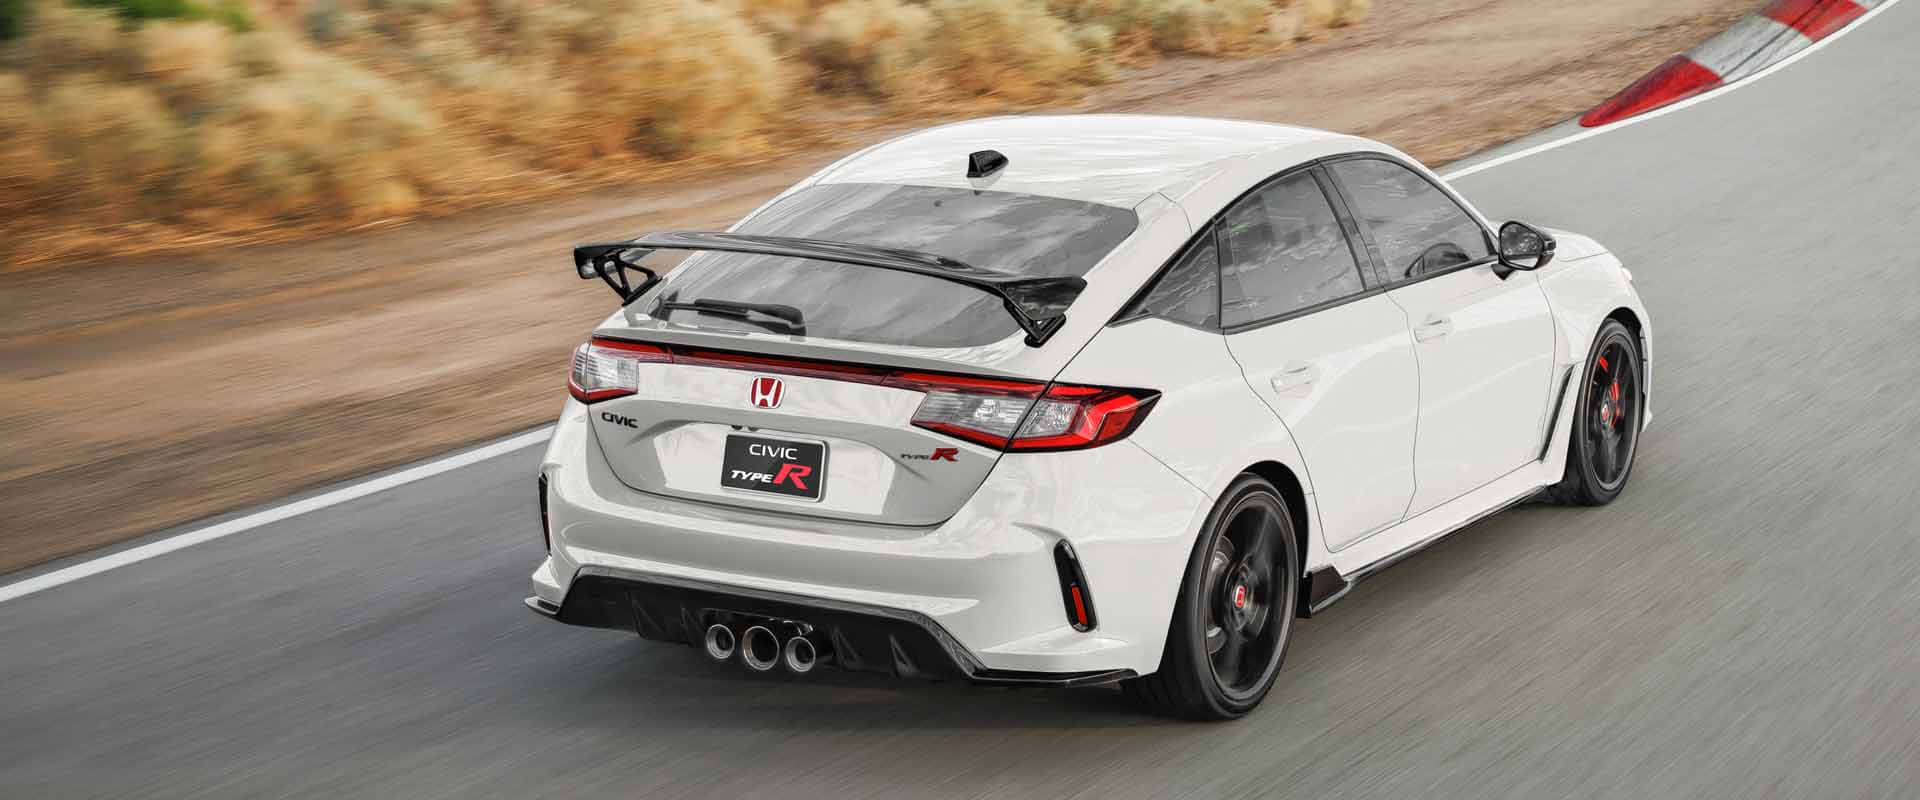 Upgrade Your Ride with the Honda Civic Type R Wallpaper